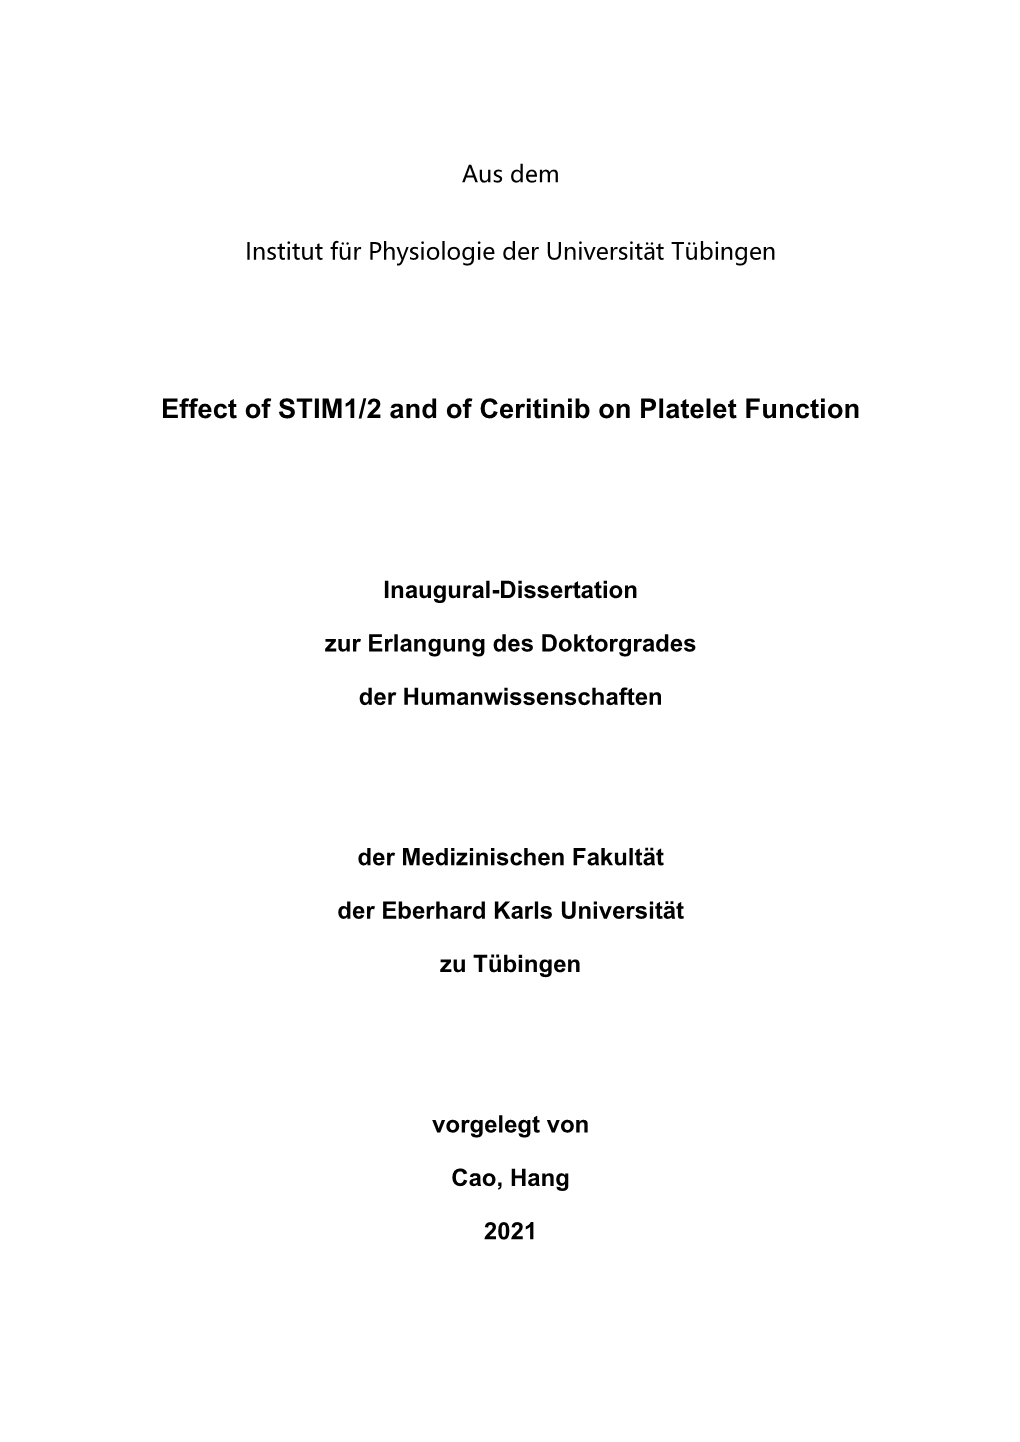 Effect of STIM1/2 and of Ceritinib on Platelet Function